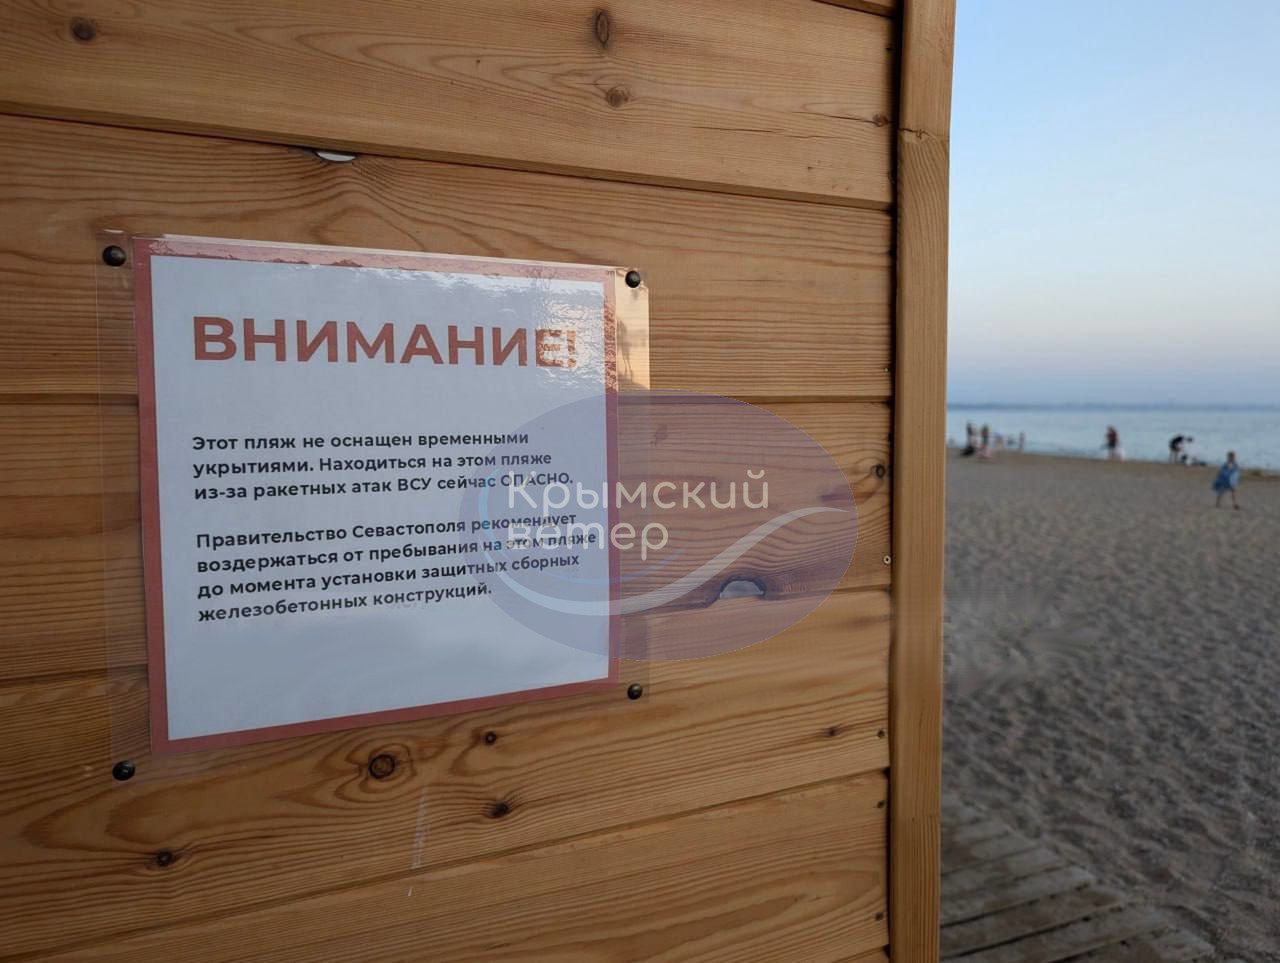 Sevastopol beaches prepare for shelters amid ongoing missile threat